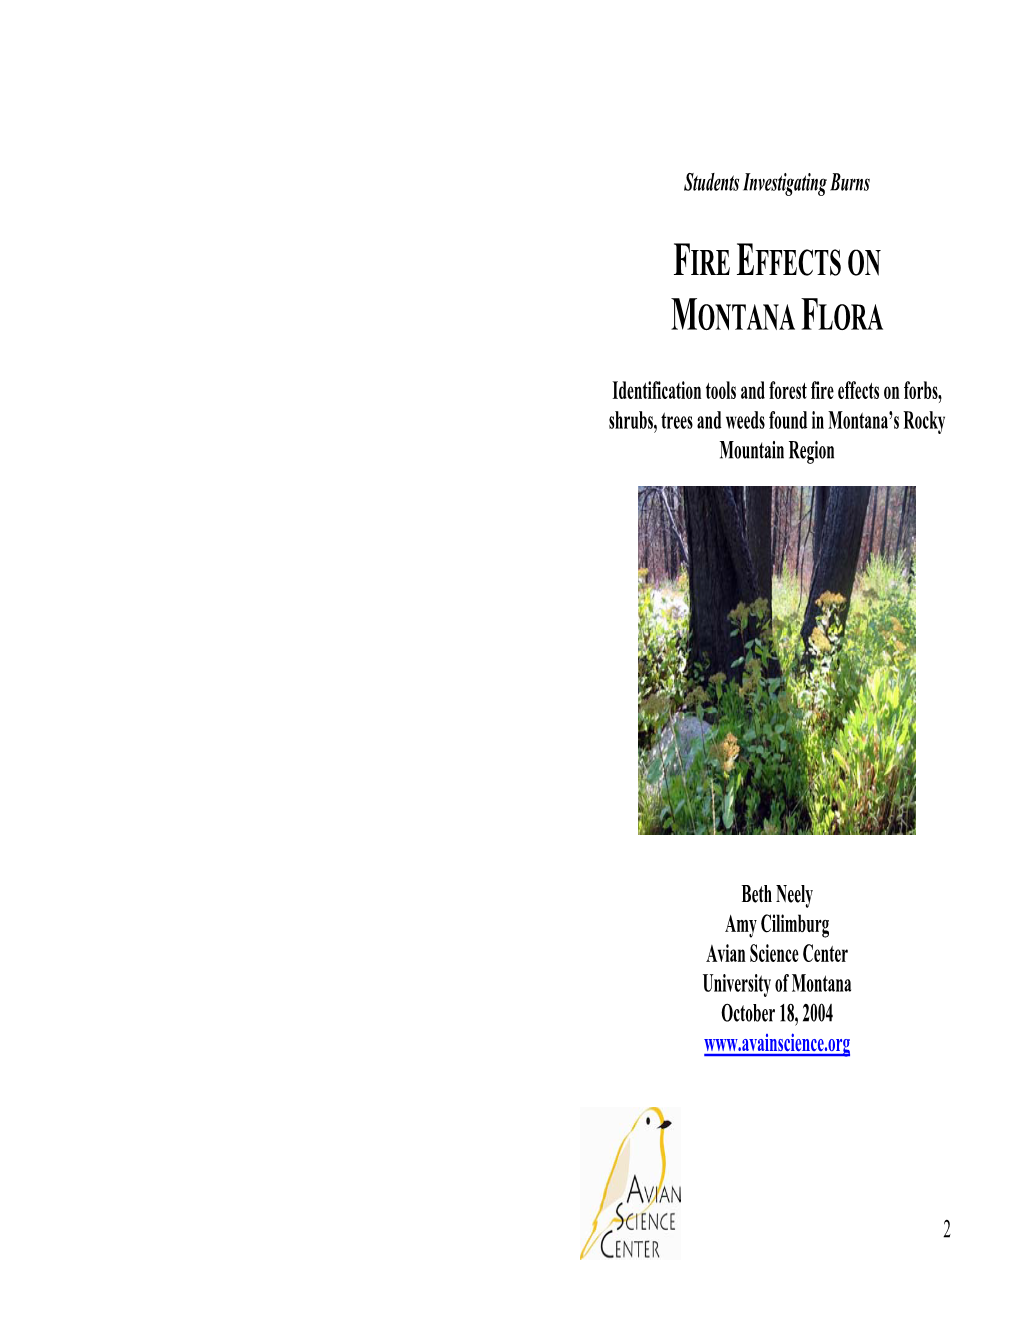 Montana Flora ID Specifications and Post-Fire Effects